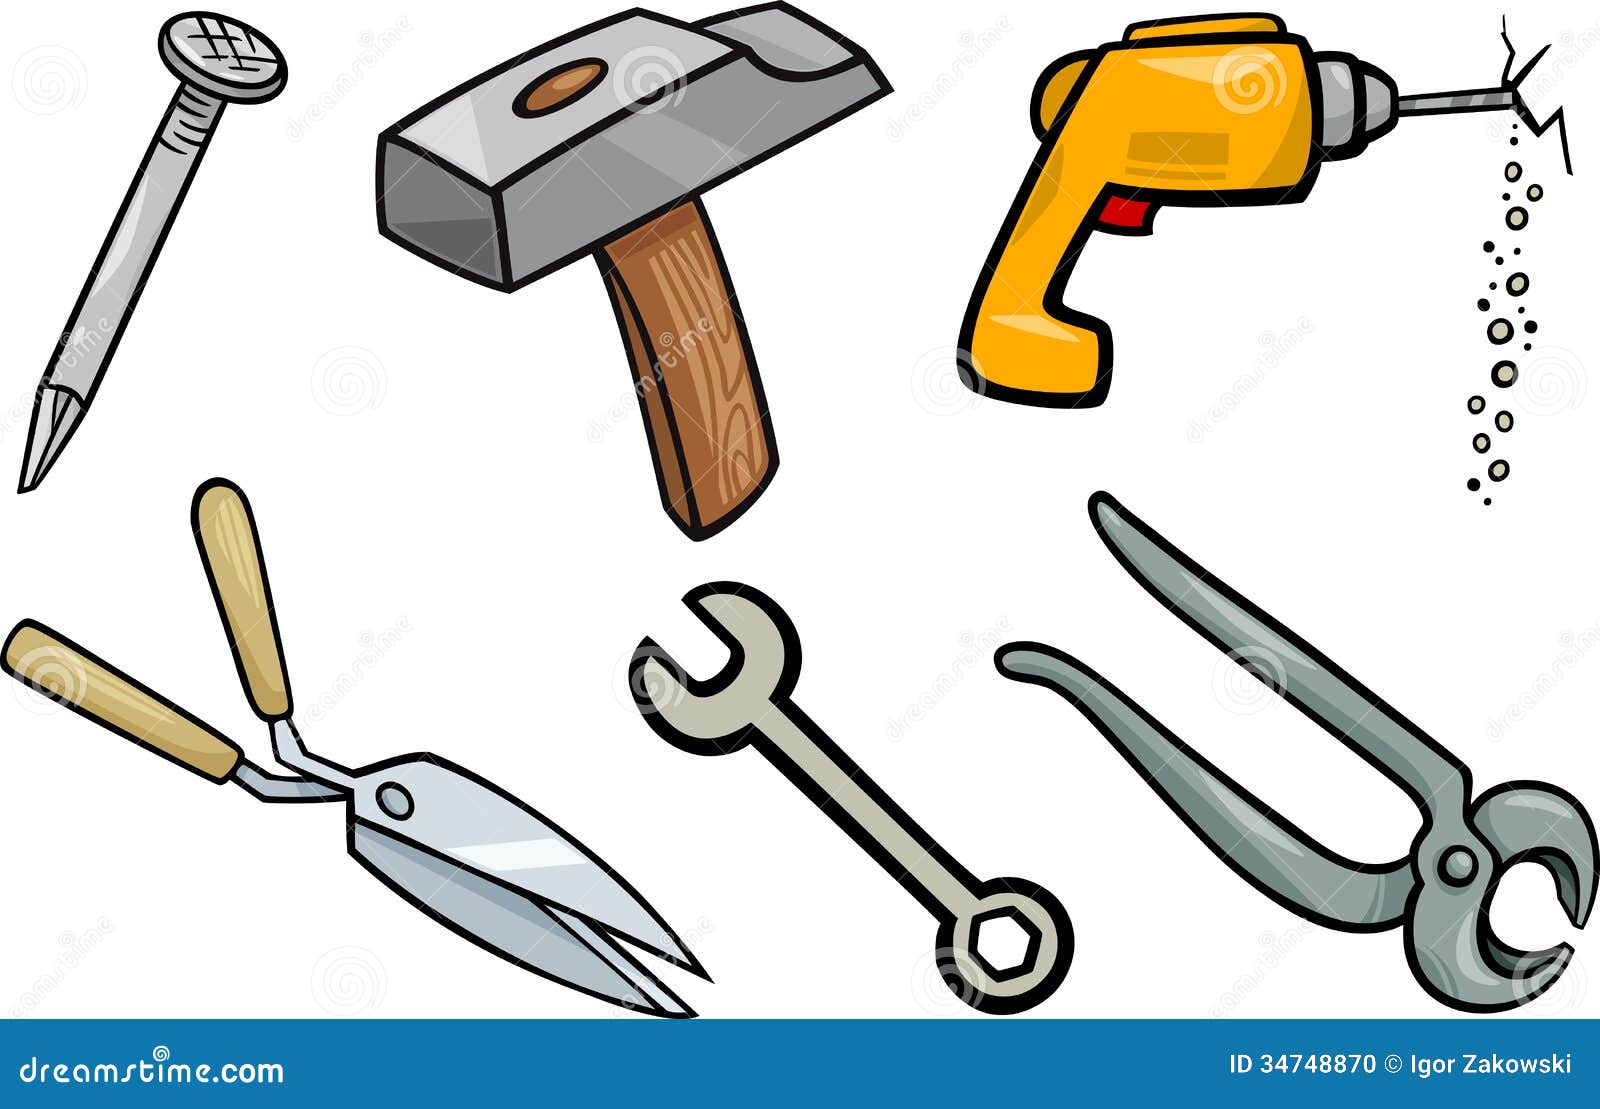 objects clipart images - photo #25